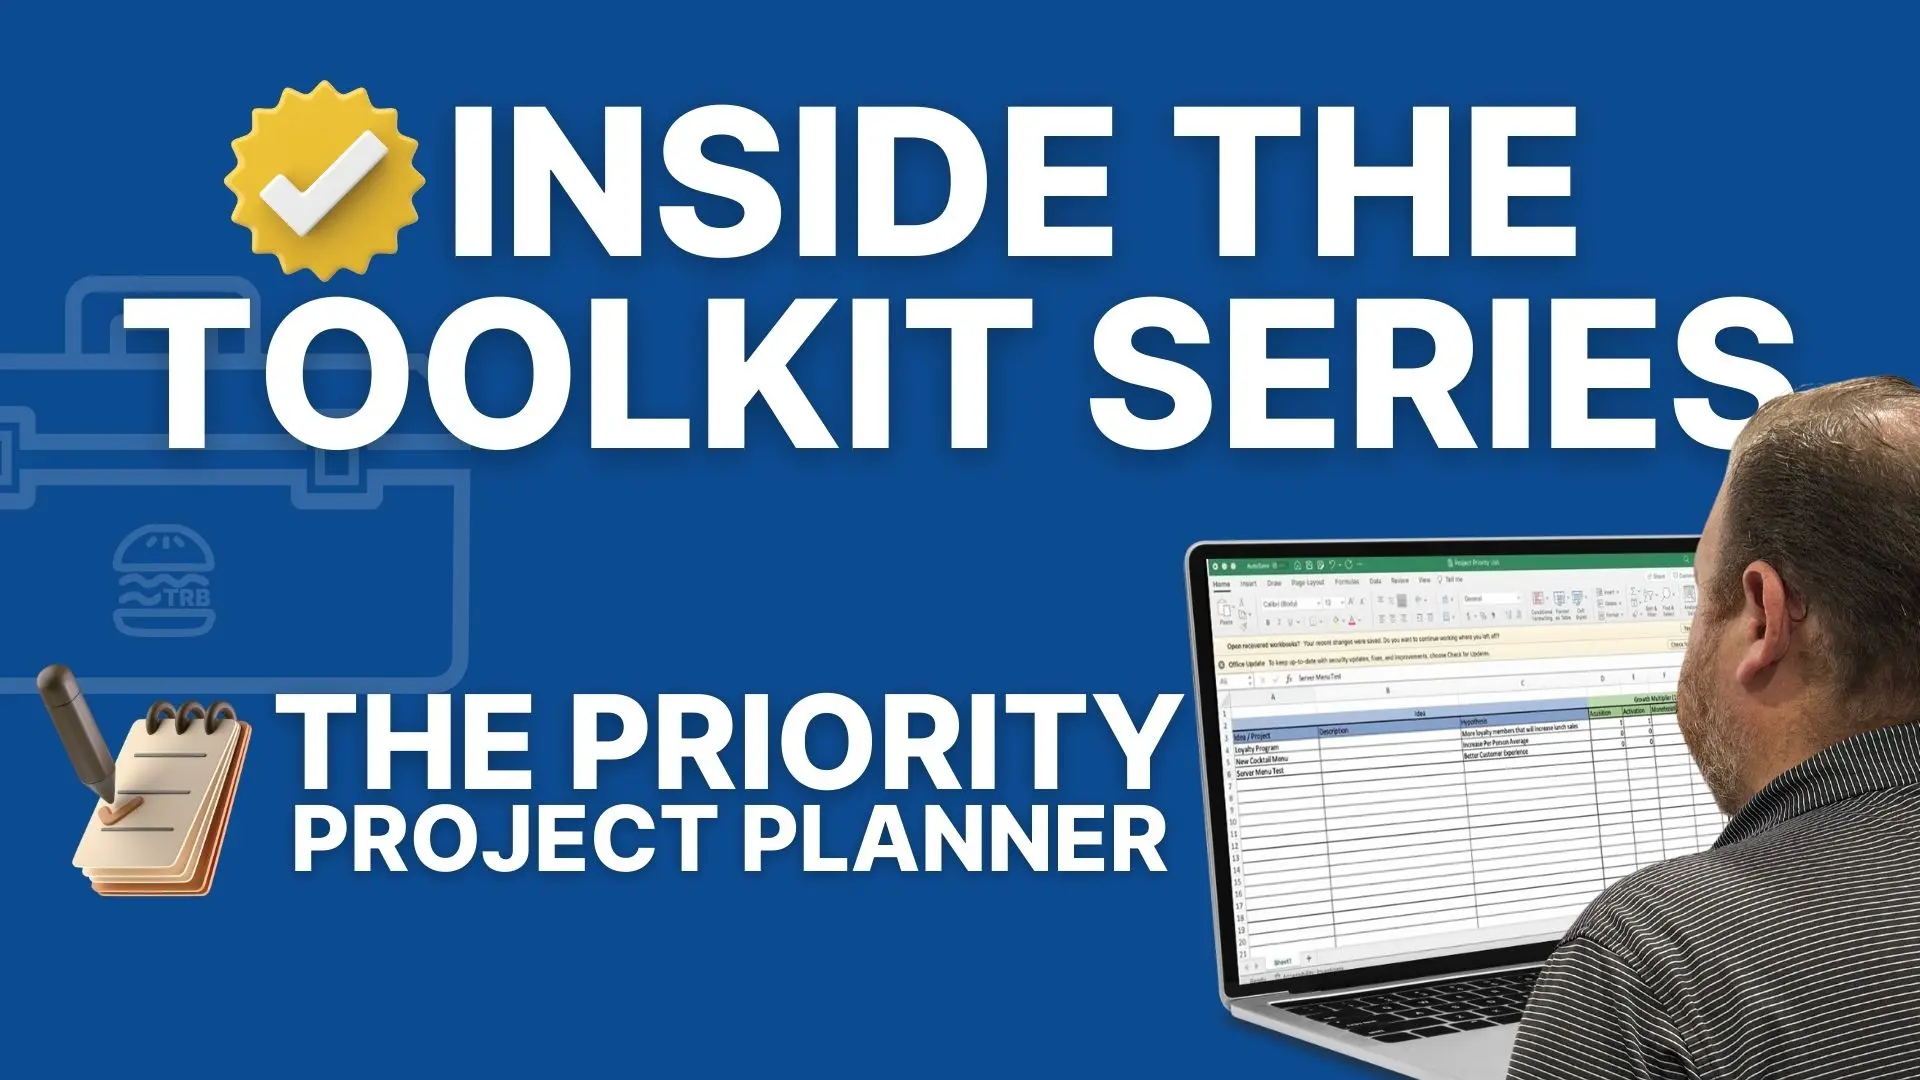 How to Use The Project Planner: Ryan’s TRB Restaurant Owners Toolkit Breakdown